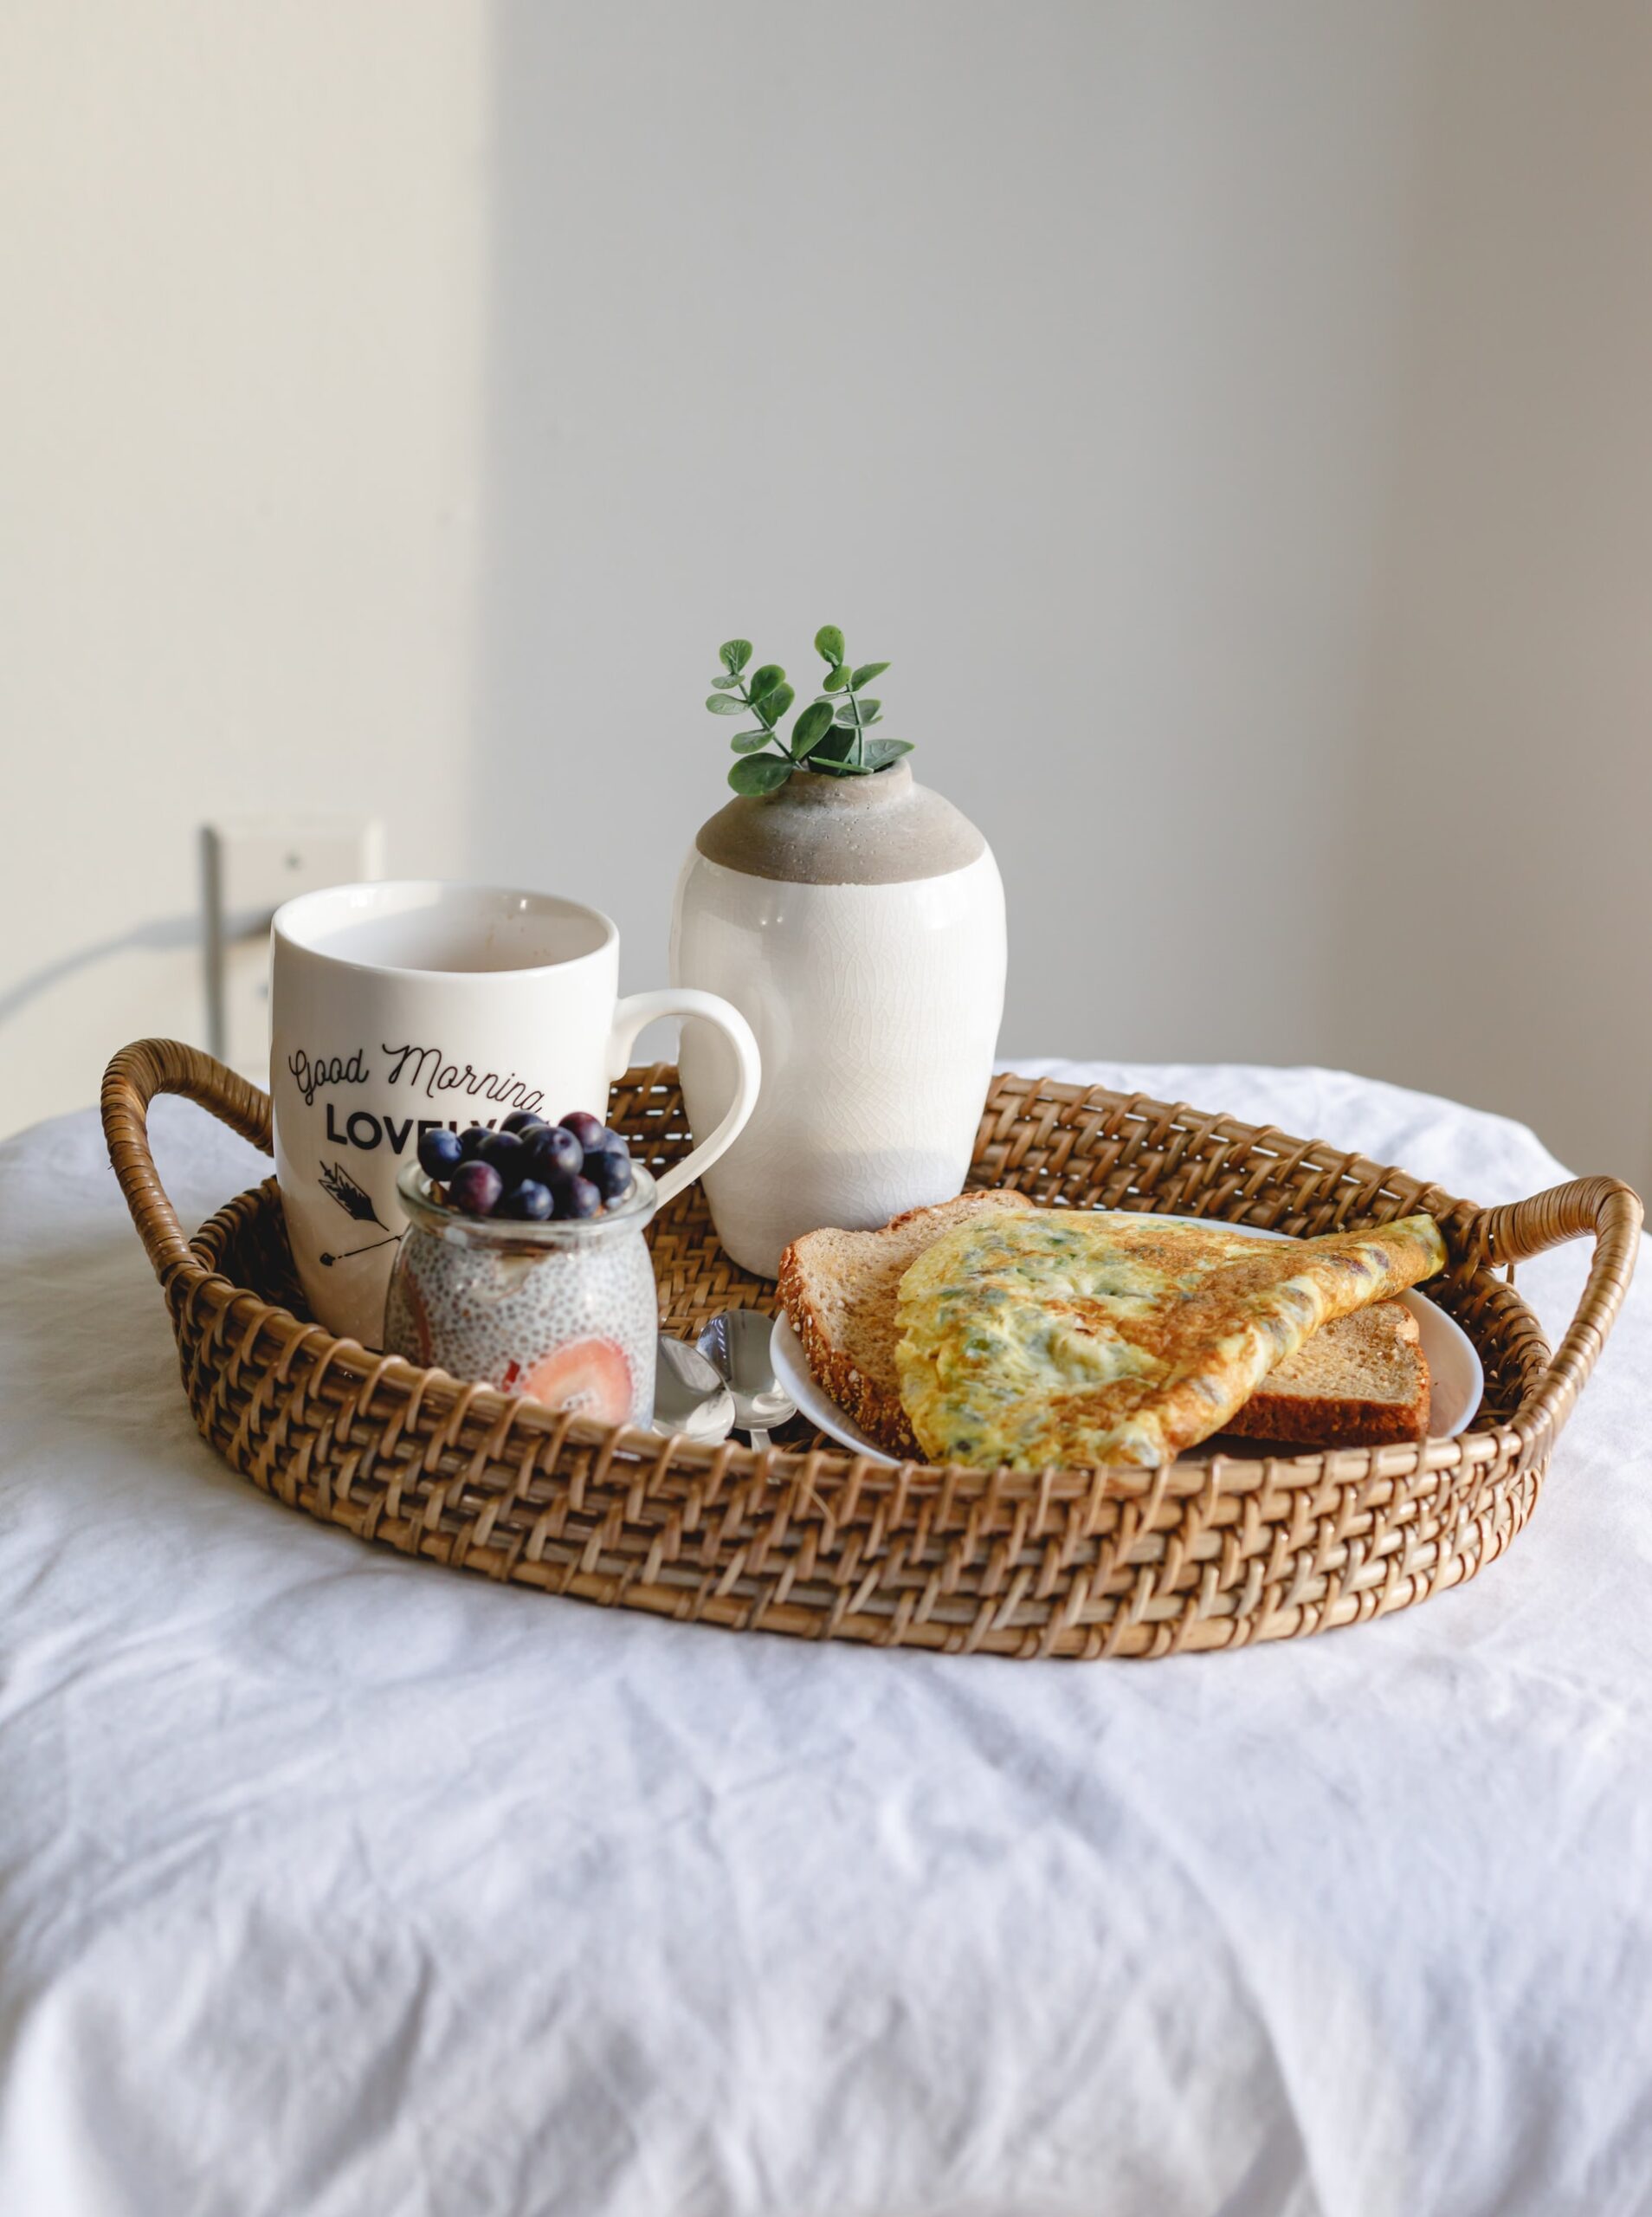 Breakfast ideas to recreate at home